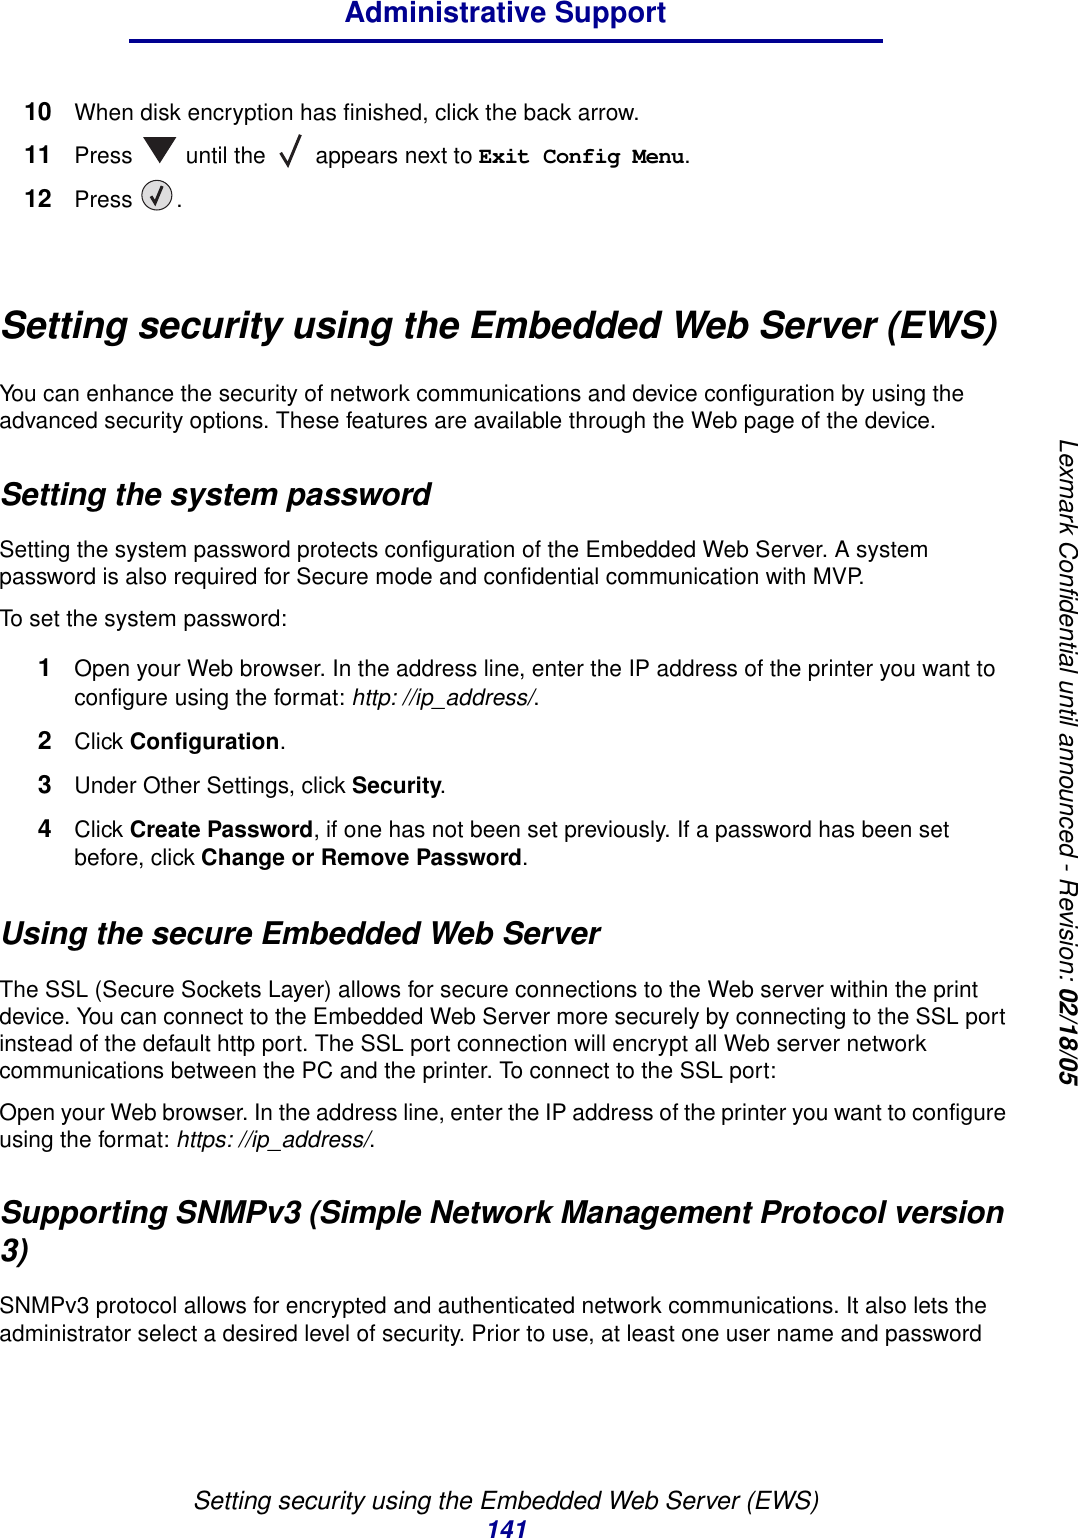 Setting security using the Embedded Web Server (EWS)141Administrative SupportLexmark Confidential until announced - Revision: 02/18/0510 When disk encryption has finished, click the back arrow.11 Press   until the   appears next to Exit Config Menu.12 Press .Setting security using the Embedded Web Server (EWS)You can enhance the security of network communications and device configuration by using the advanced security options. These features are available through the Web page of the device.Setting the system passwordSetting the system password protects configuration of the Embedded Web Server. A system password is also required for Secure mode and confidential communication with MVP.To set the system password:1Open your Web browser. In the address line, enter the IP address of the printer you want to configure using the format: http: //ip_address/.2Click Configuration.3Under Other Settings, click Security.4Click Create Password, if one has not been set previously. If a password has been set before, click Change or Remove Password.Using the secure Embedded Web ServerThe SSL (Secure Sockets Layer) allows for secure connections to the Web server within the print device. You can connect to the Embedded Web Server more securely by connecting to the SSL port instead of the default http port. The SSL port connection will encrypt all Web server network communications between the PC and the printer. To connect to the SSL port:Open your Web browser. In the address line, enter the IP address of the printer you want to configure using the format: https: //ip_address/.Supporting SNMPv3 (Simple Network Management Protocol version 3)SNMPv3 protocol allows for encrypted and authenticated network communications. It also lets the administrator select a desired level of security. Prior to use, at least one user name and password 